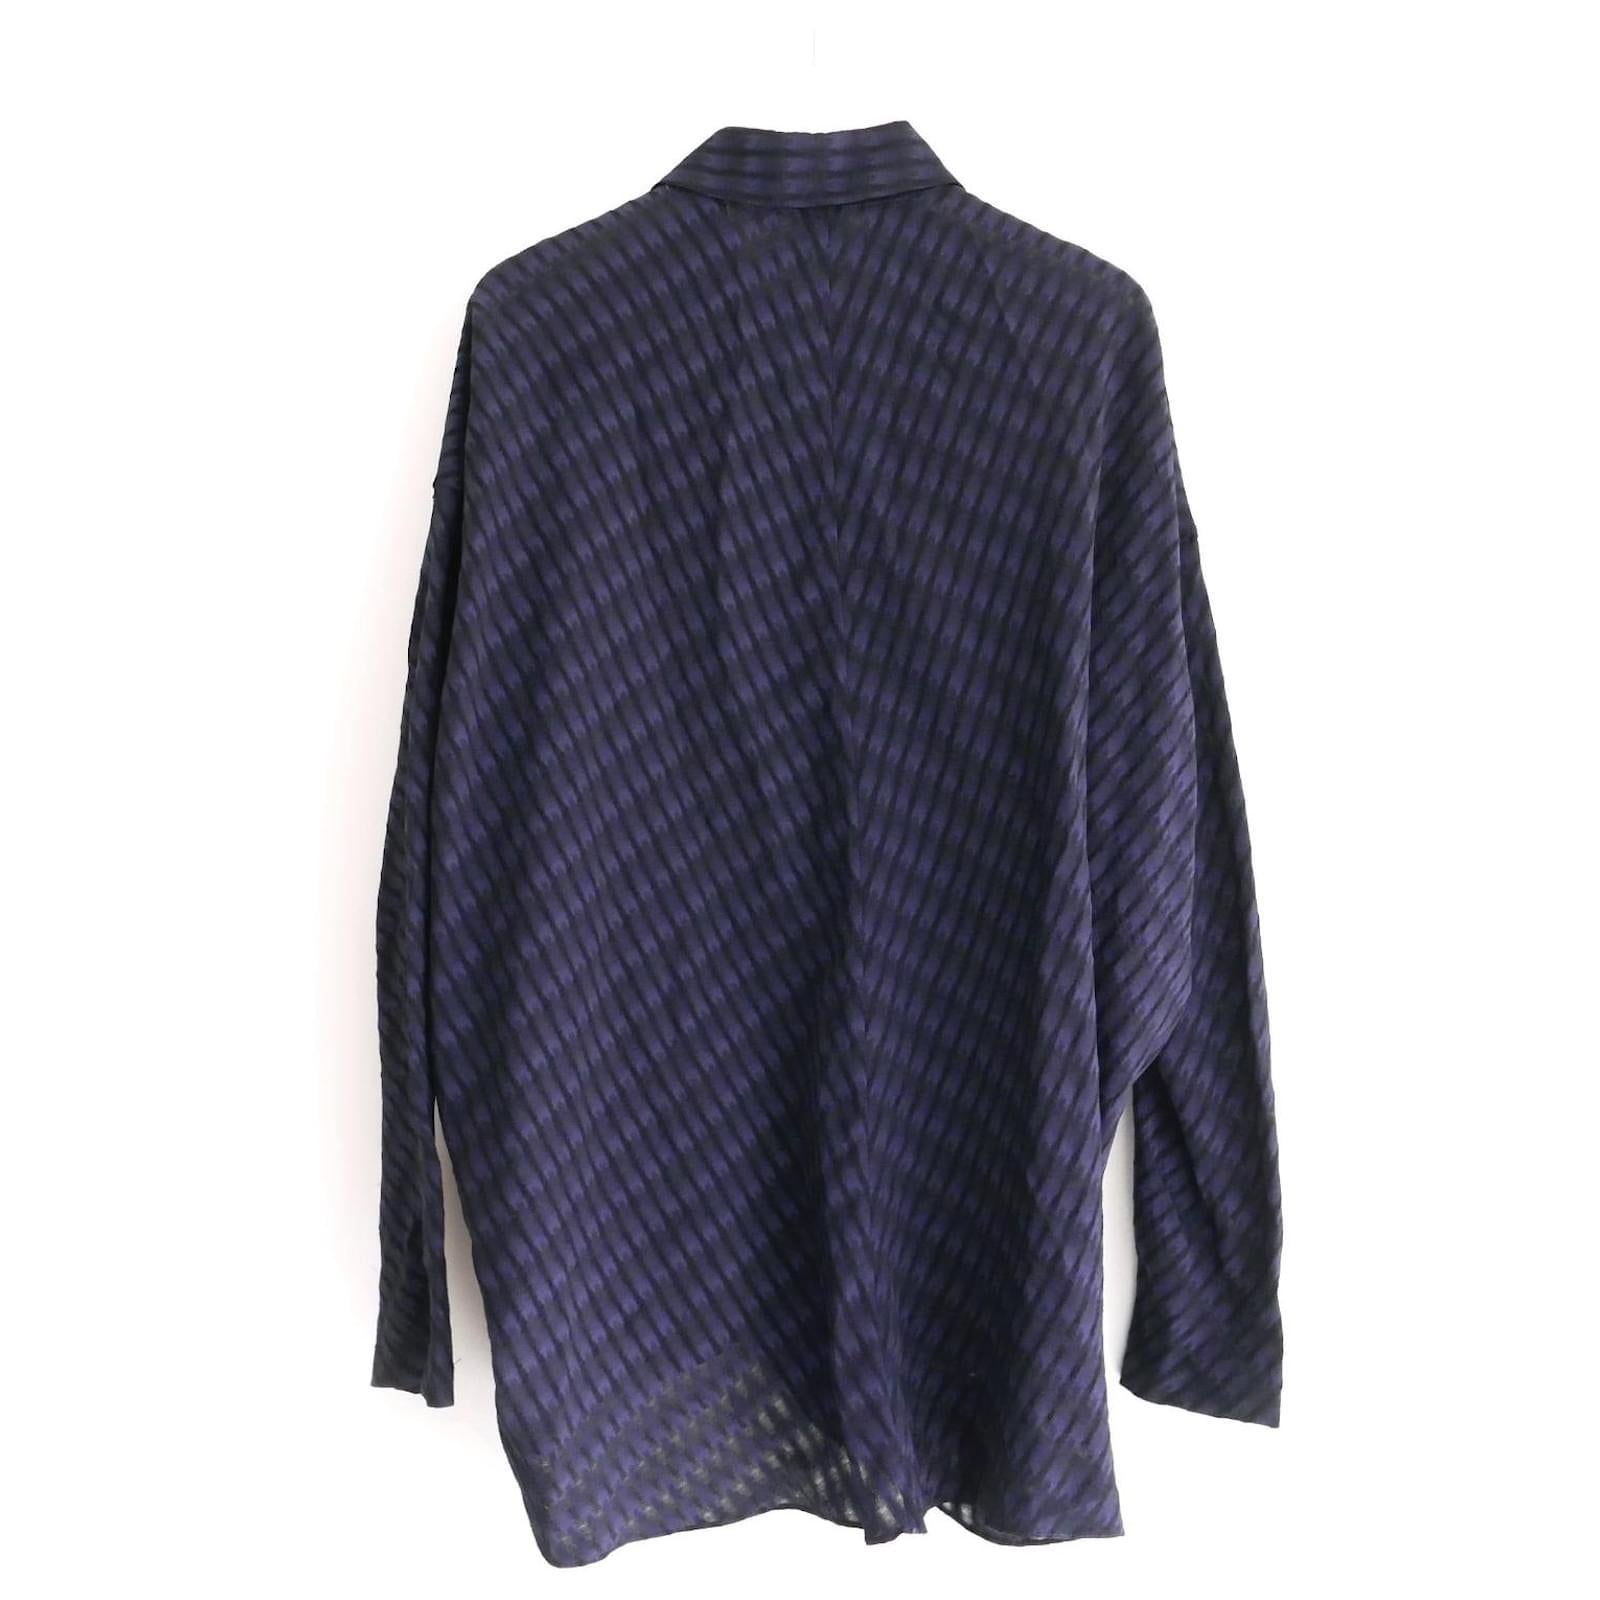 Superbly comfy and cool Zero+ Maria Cornejo loose fit shirt. Unworn. Made from blue and black graphic weave textured viscose, it has an oversized, slightly tapered cut with loose, t-cut sleeves and button front. Size US4/UK8 and will fit larger.